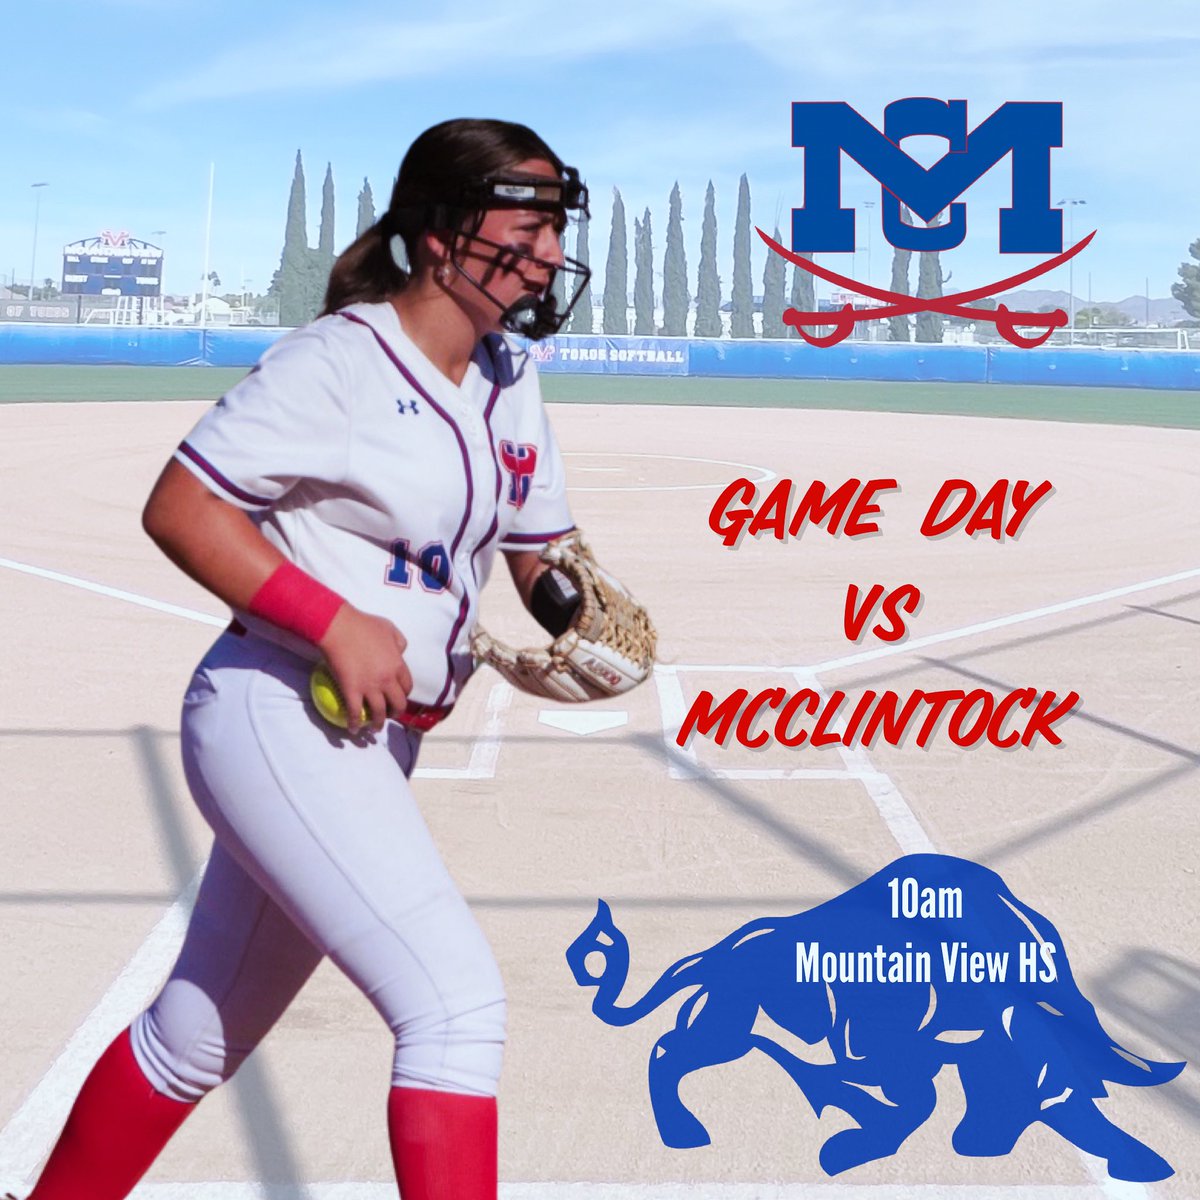 Game Day vs McClintock. The push for the playoffs continues. Varsity has a home game this morning at 10am. Come out and give them your support. Let’s go bring it Toros!